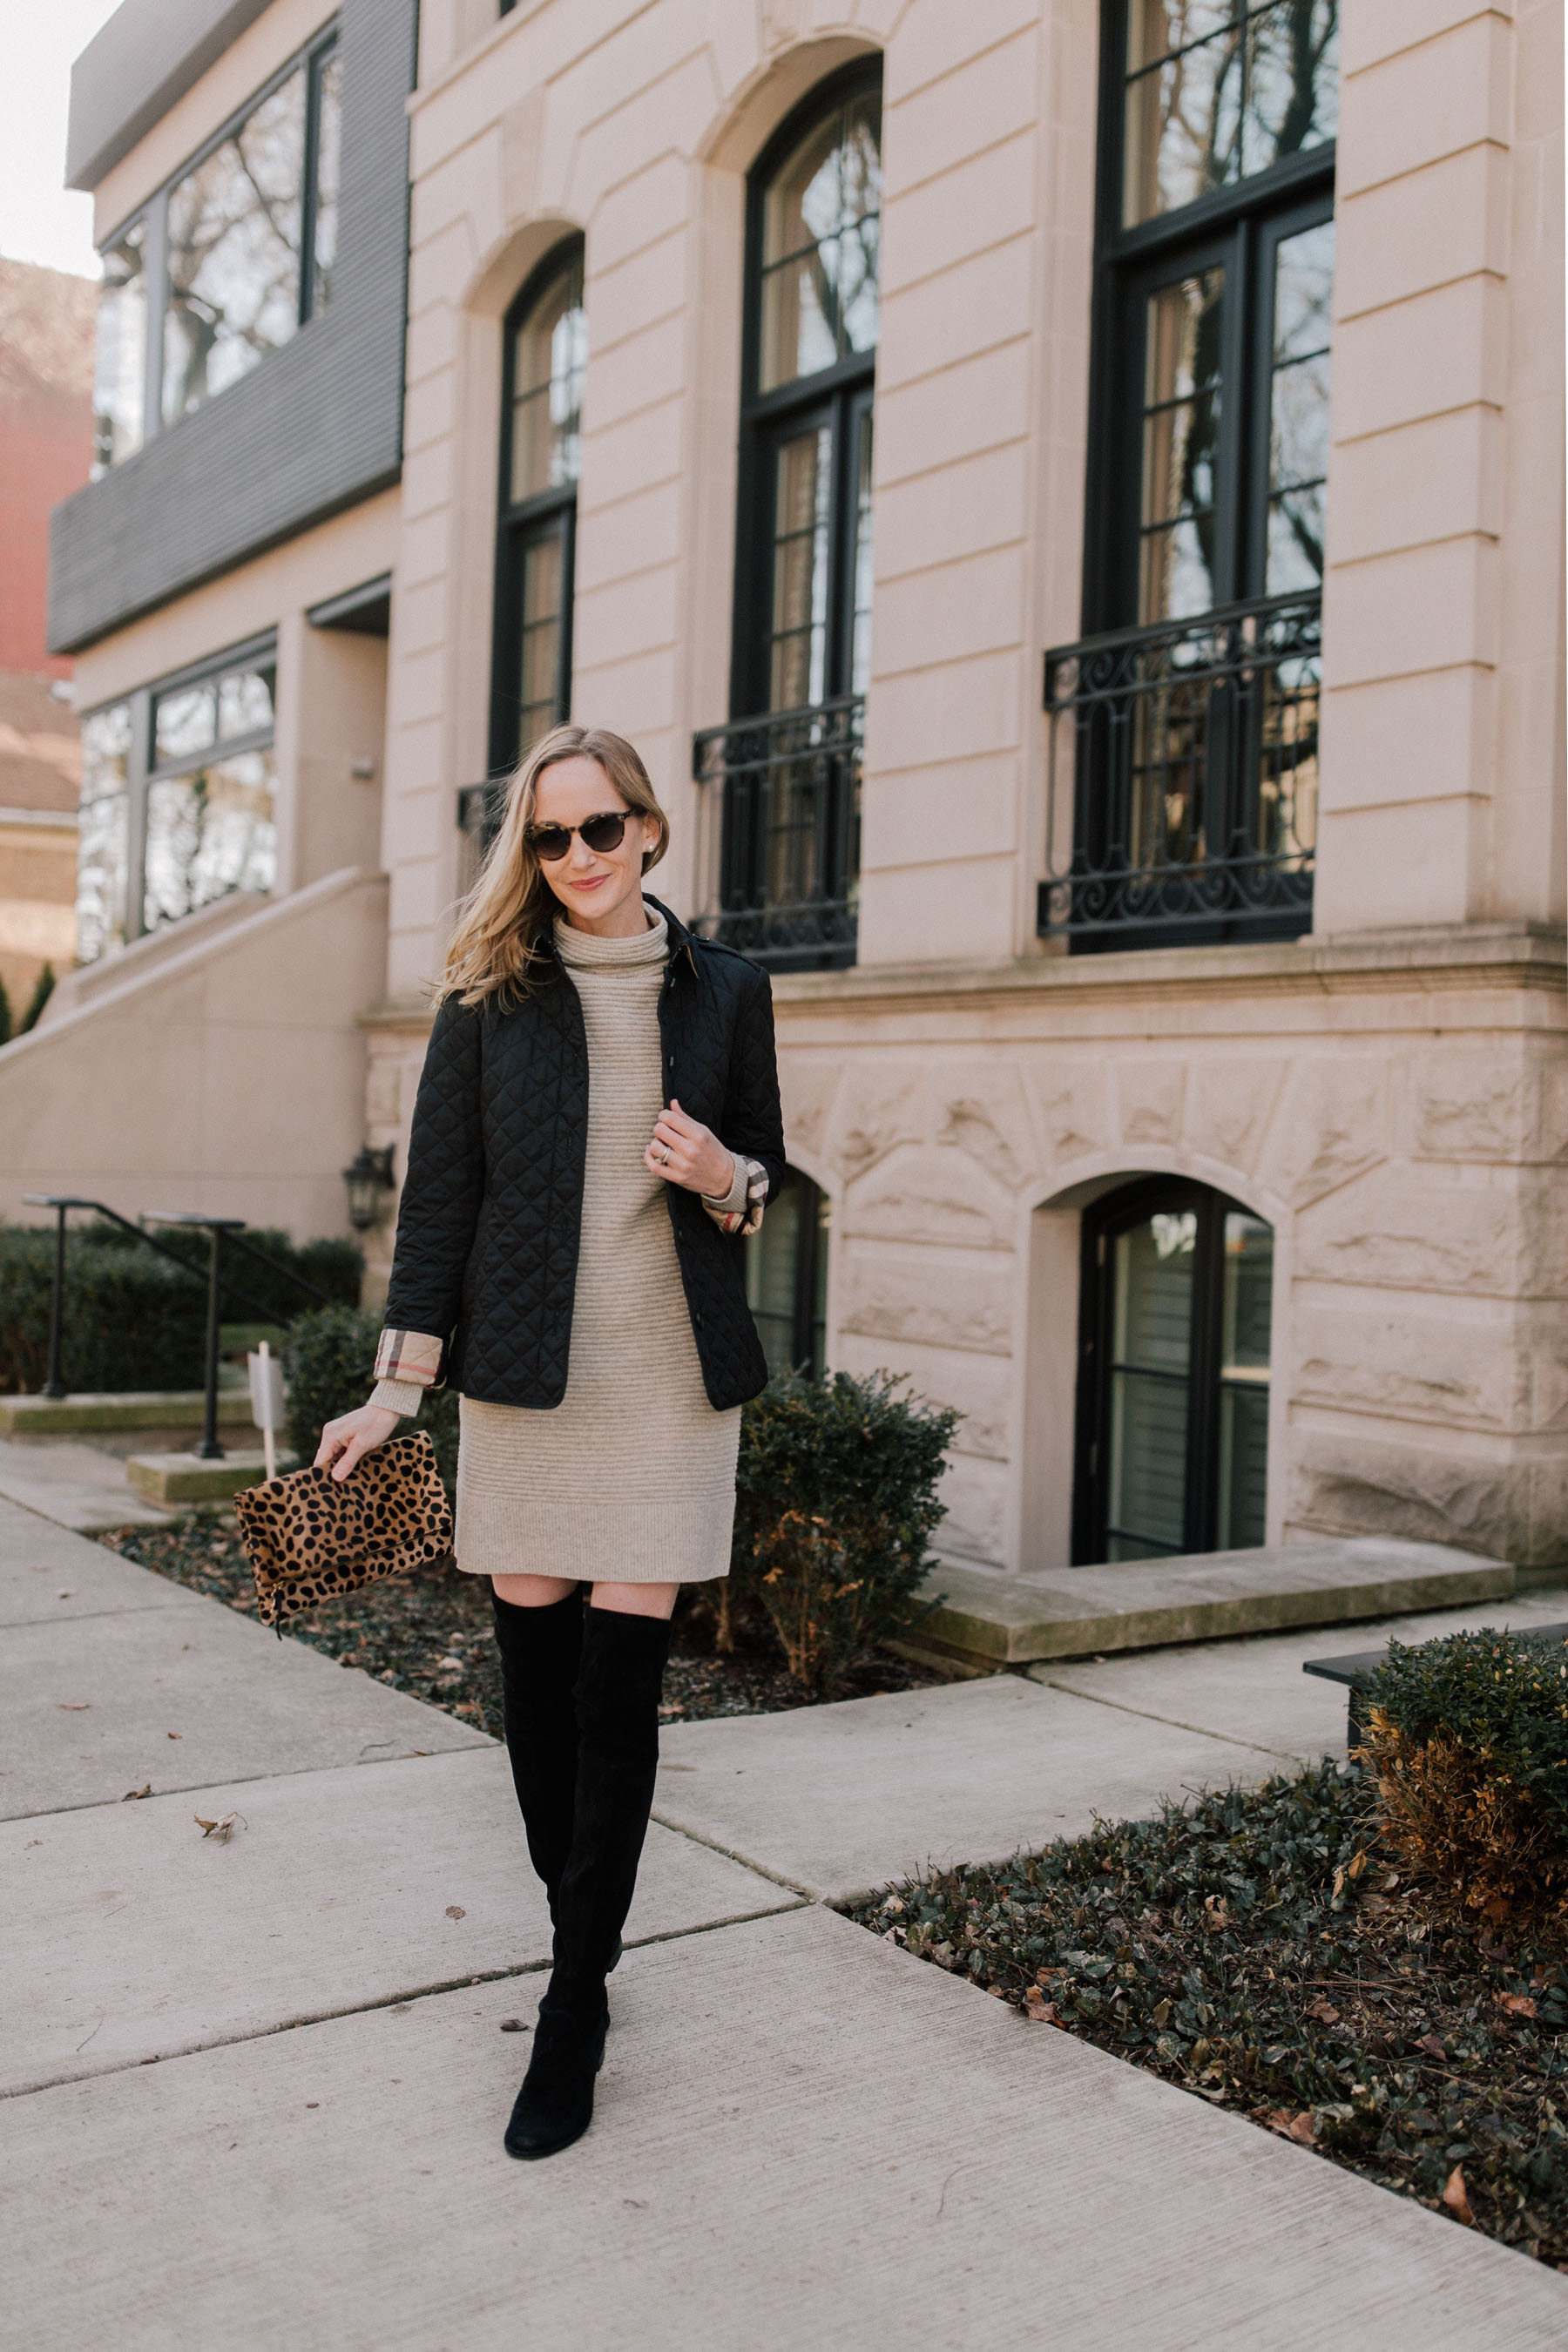 How to Wear a Sweater Over a Dress - Kelly in the City